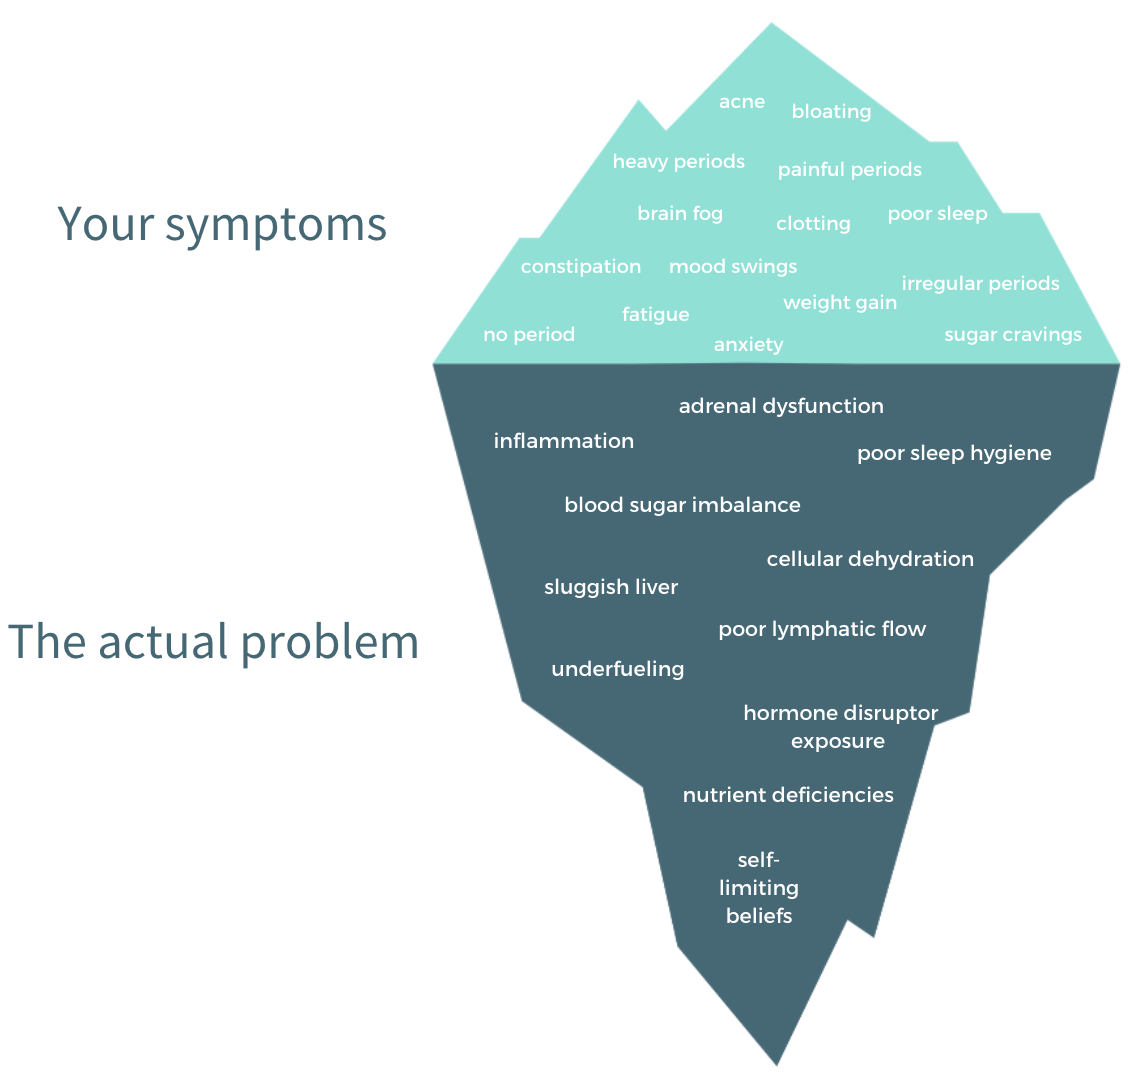 illustration of an iceberg with words describing symptoms and health problems